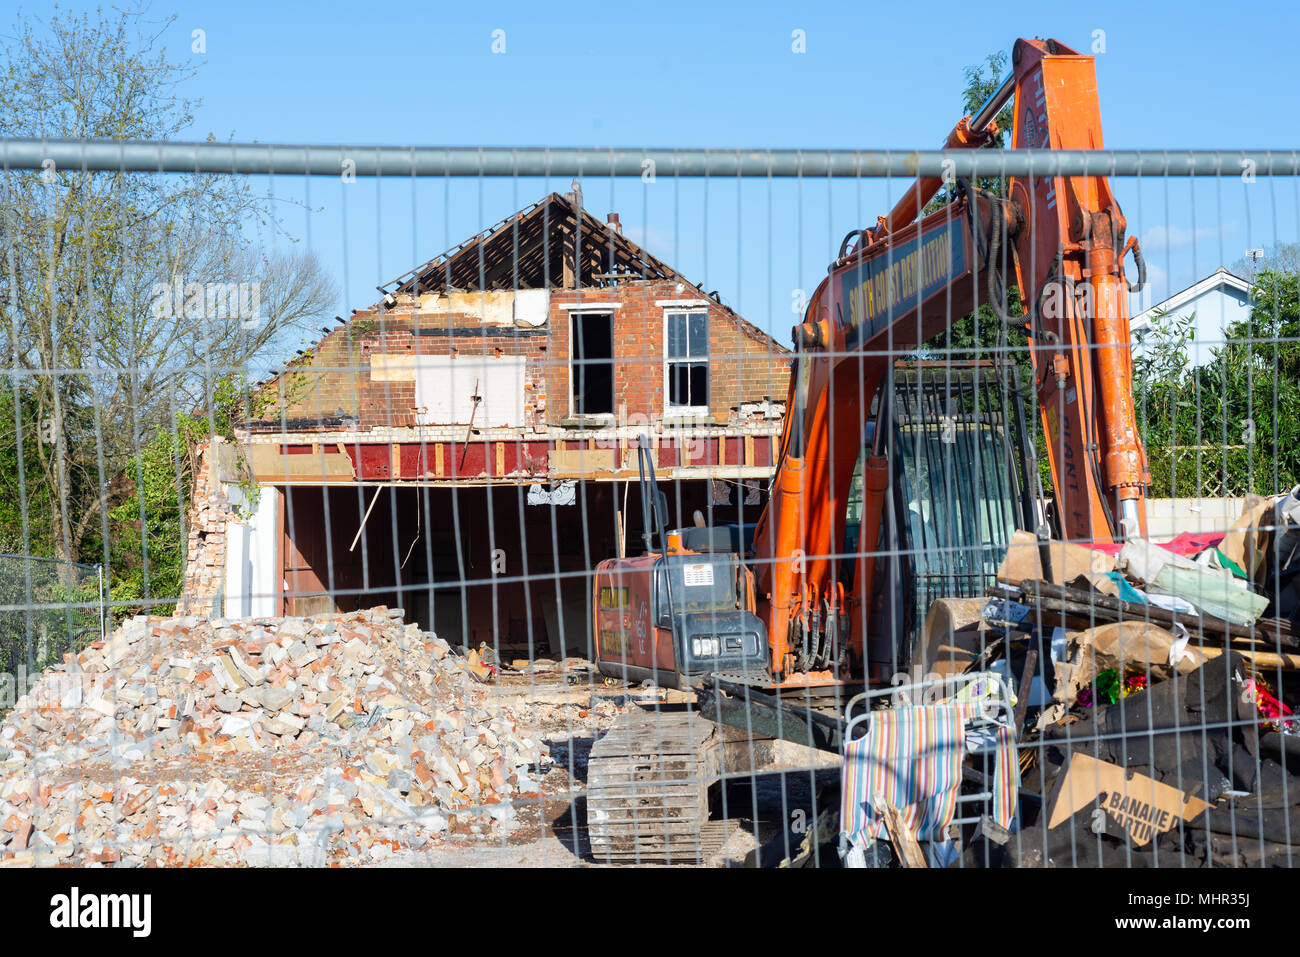 Demolition site with a long arm digger, piles of rubbish and rubble, surrounded by a metal security fence, UK Stock Photo